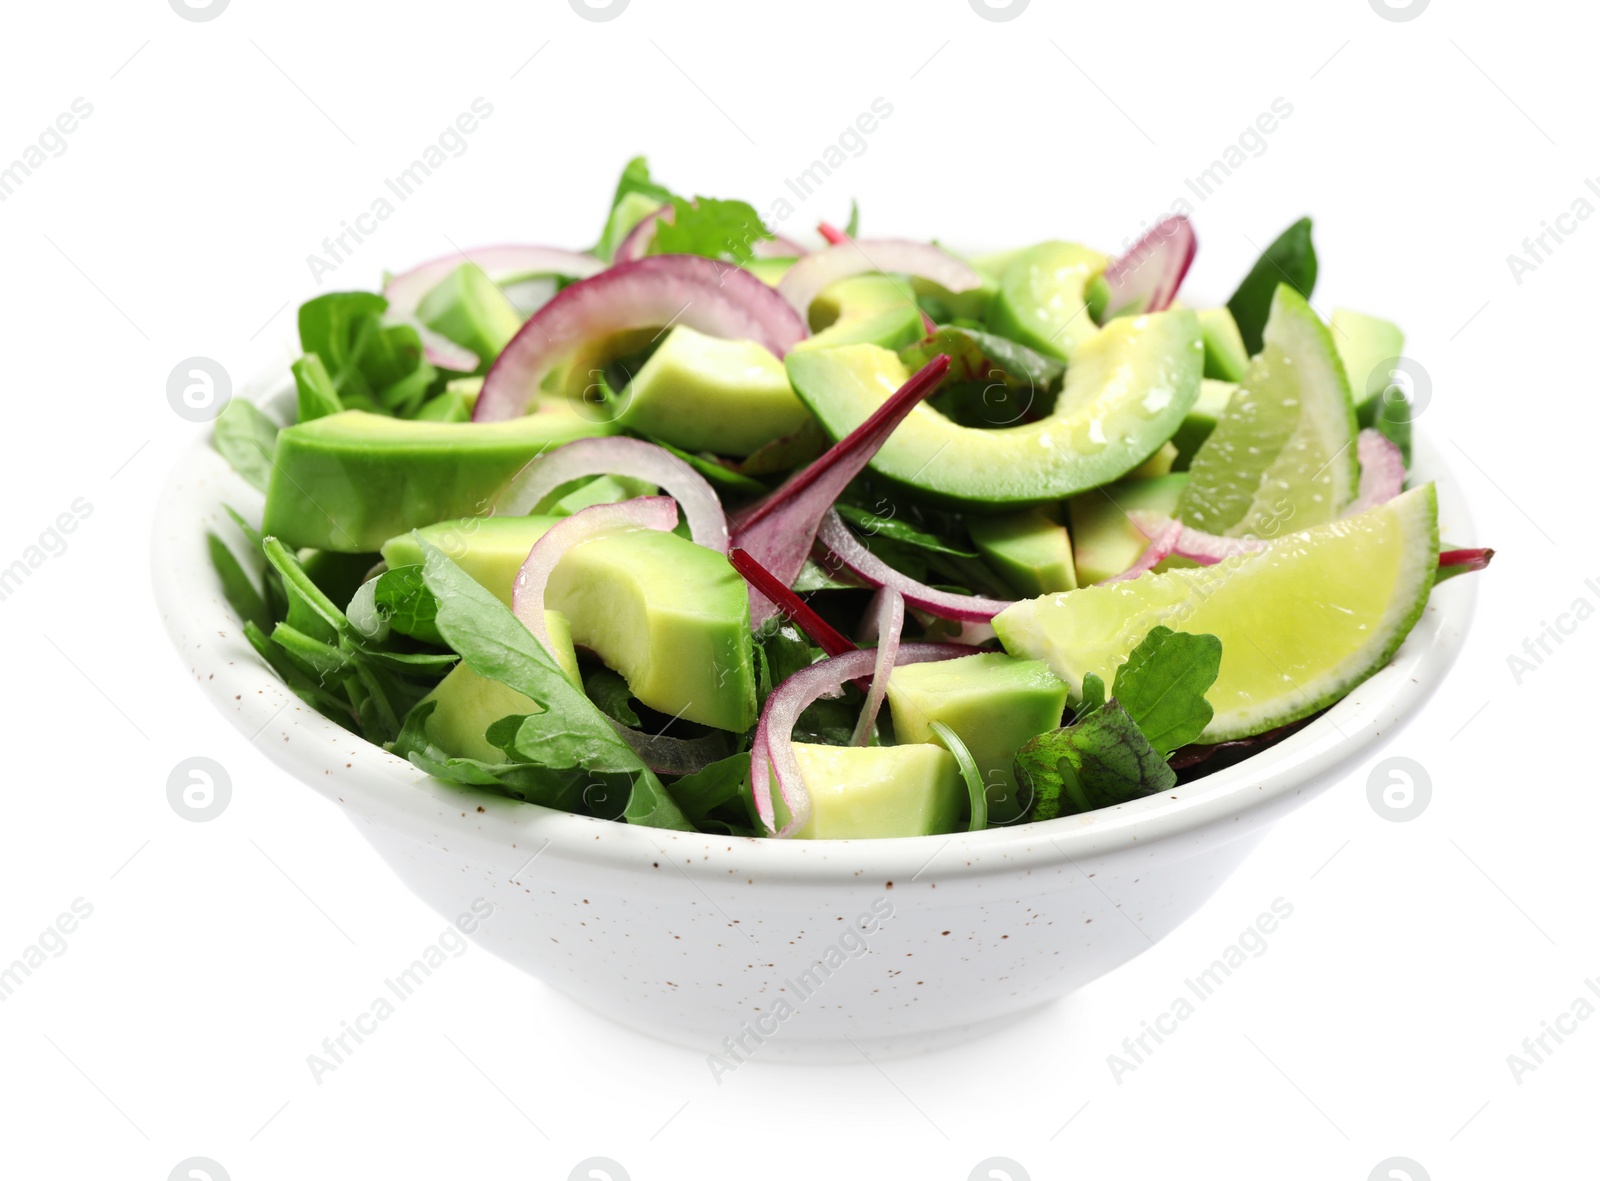 Image of Delicious salad with avocado in bowl on white background 